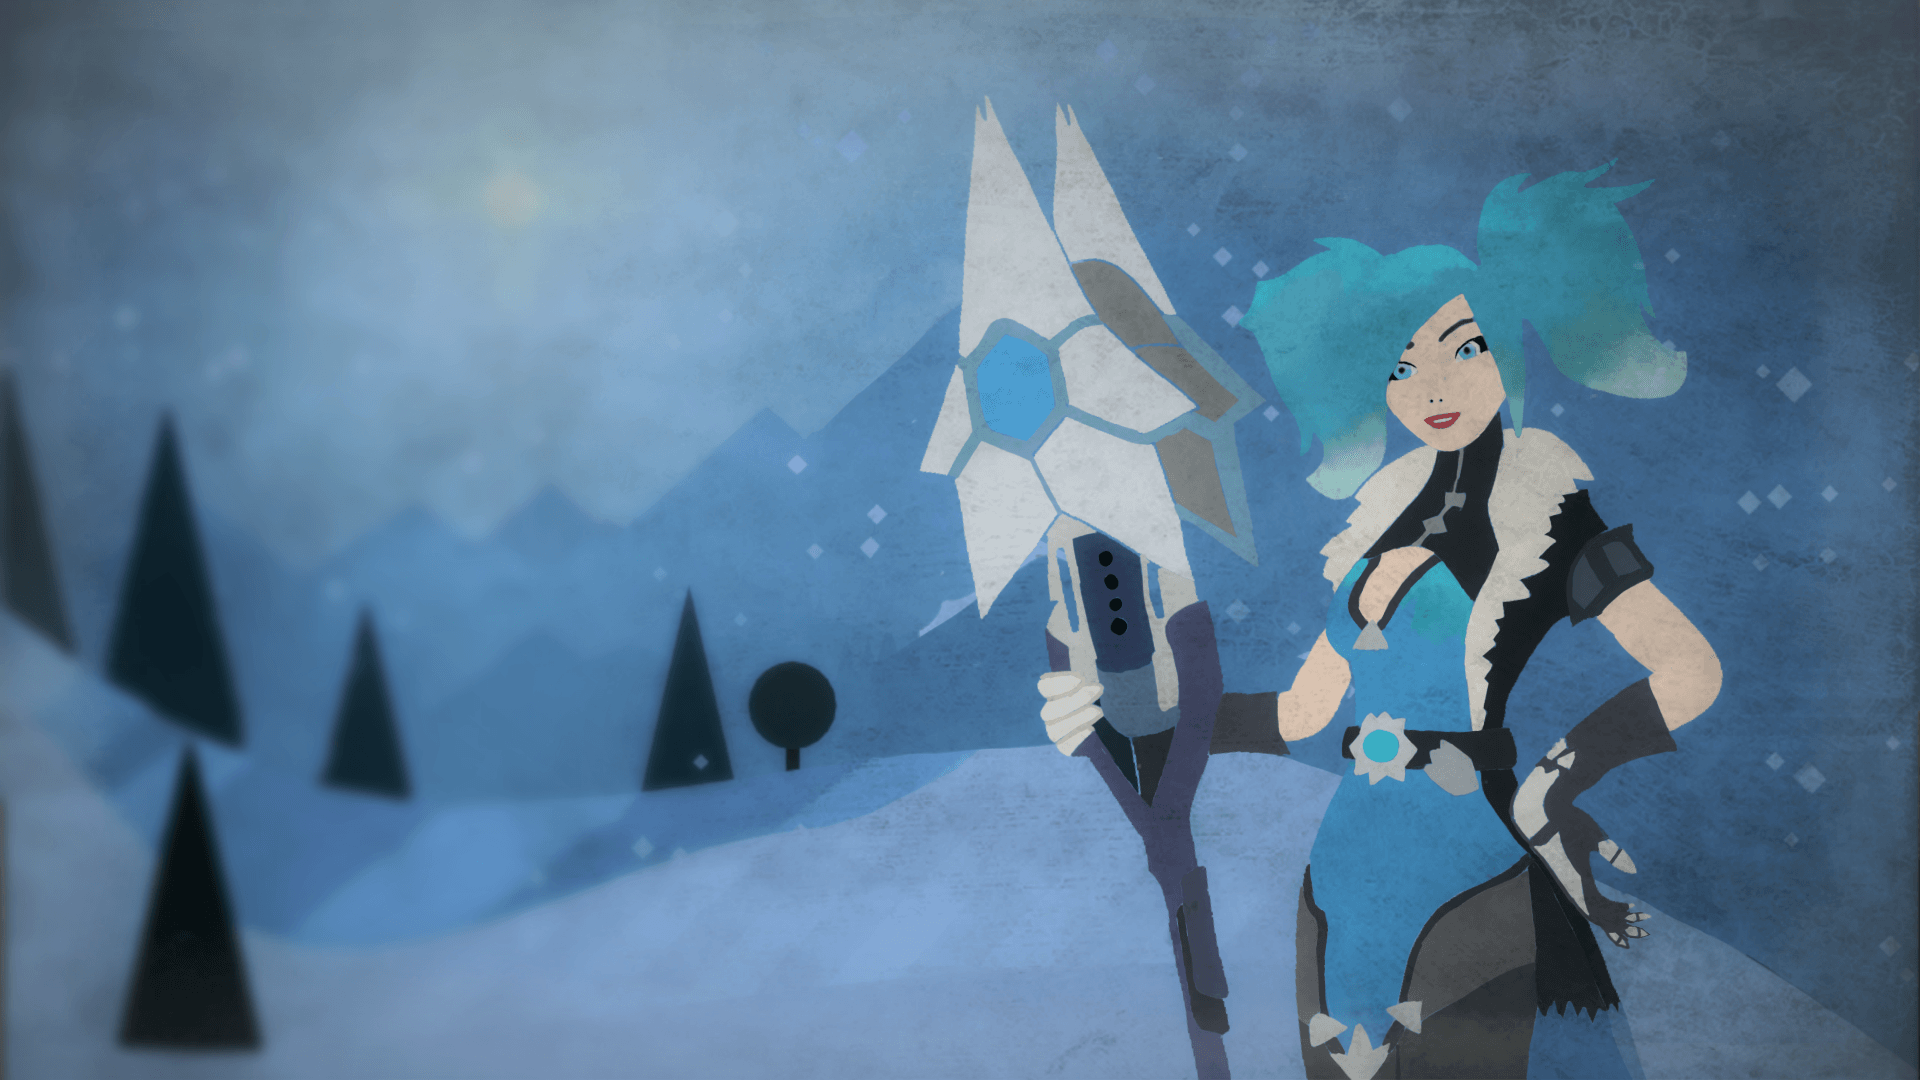 Wallpapers : Black Ice Evie